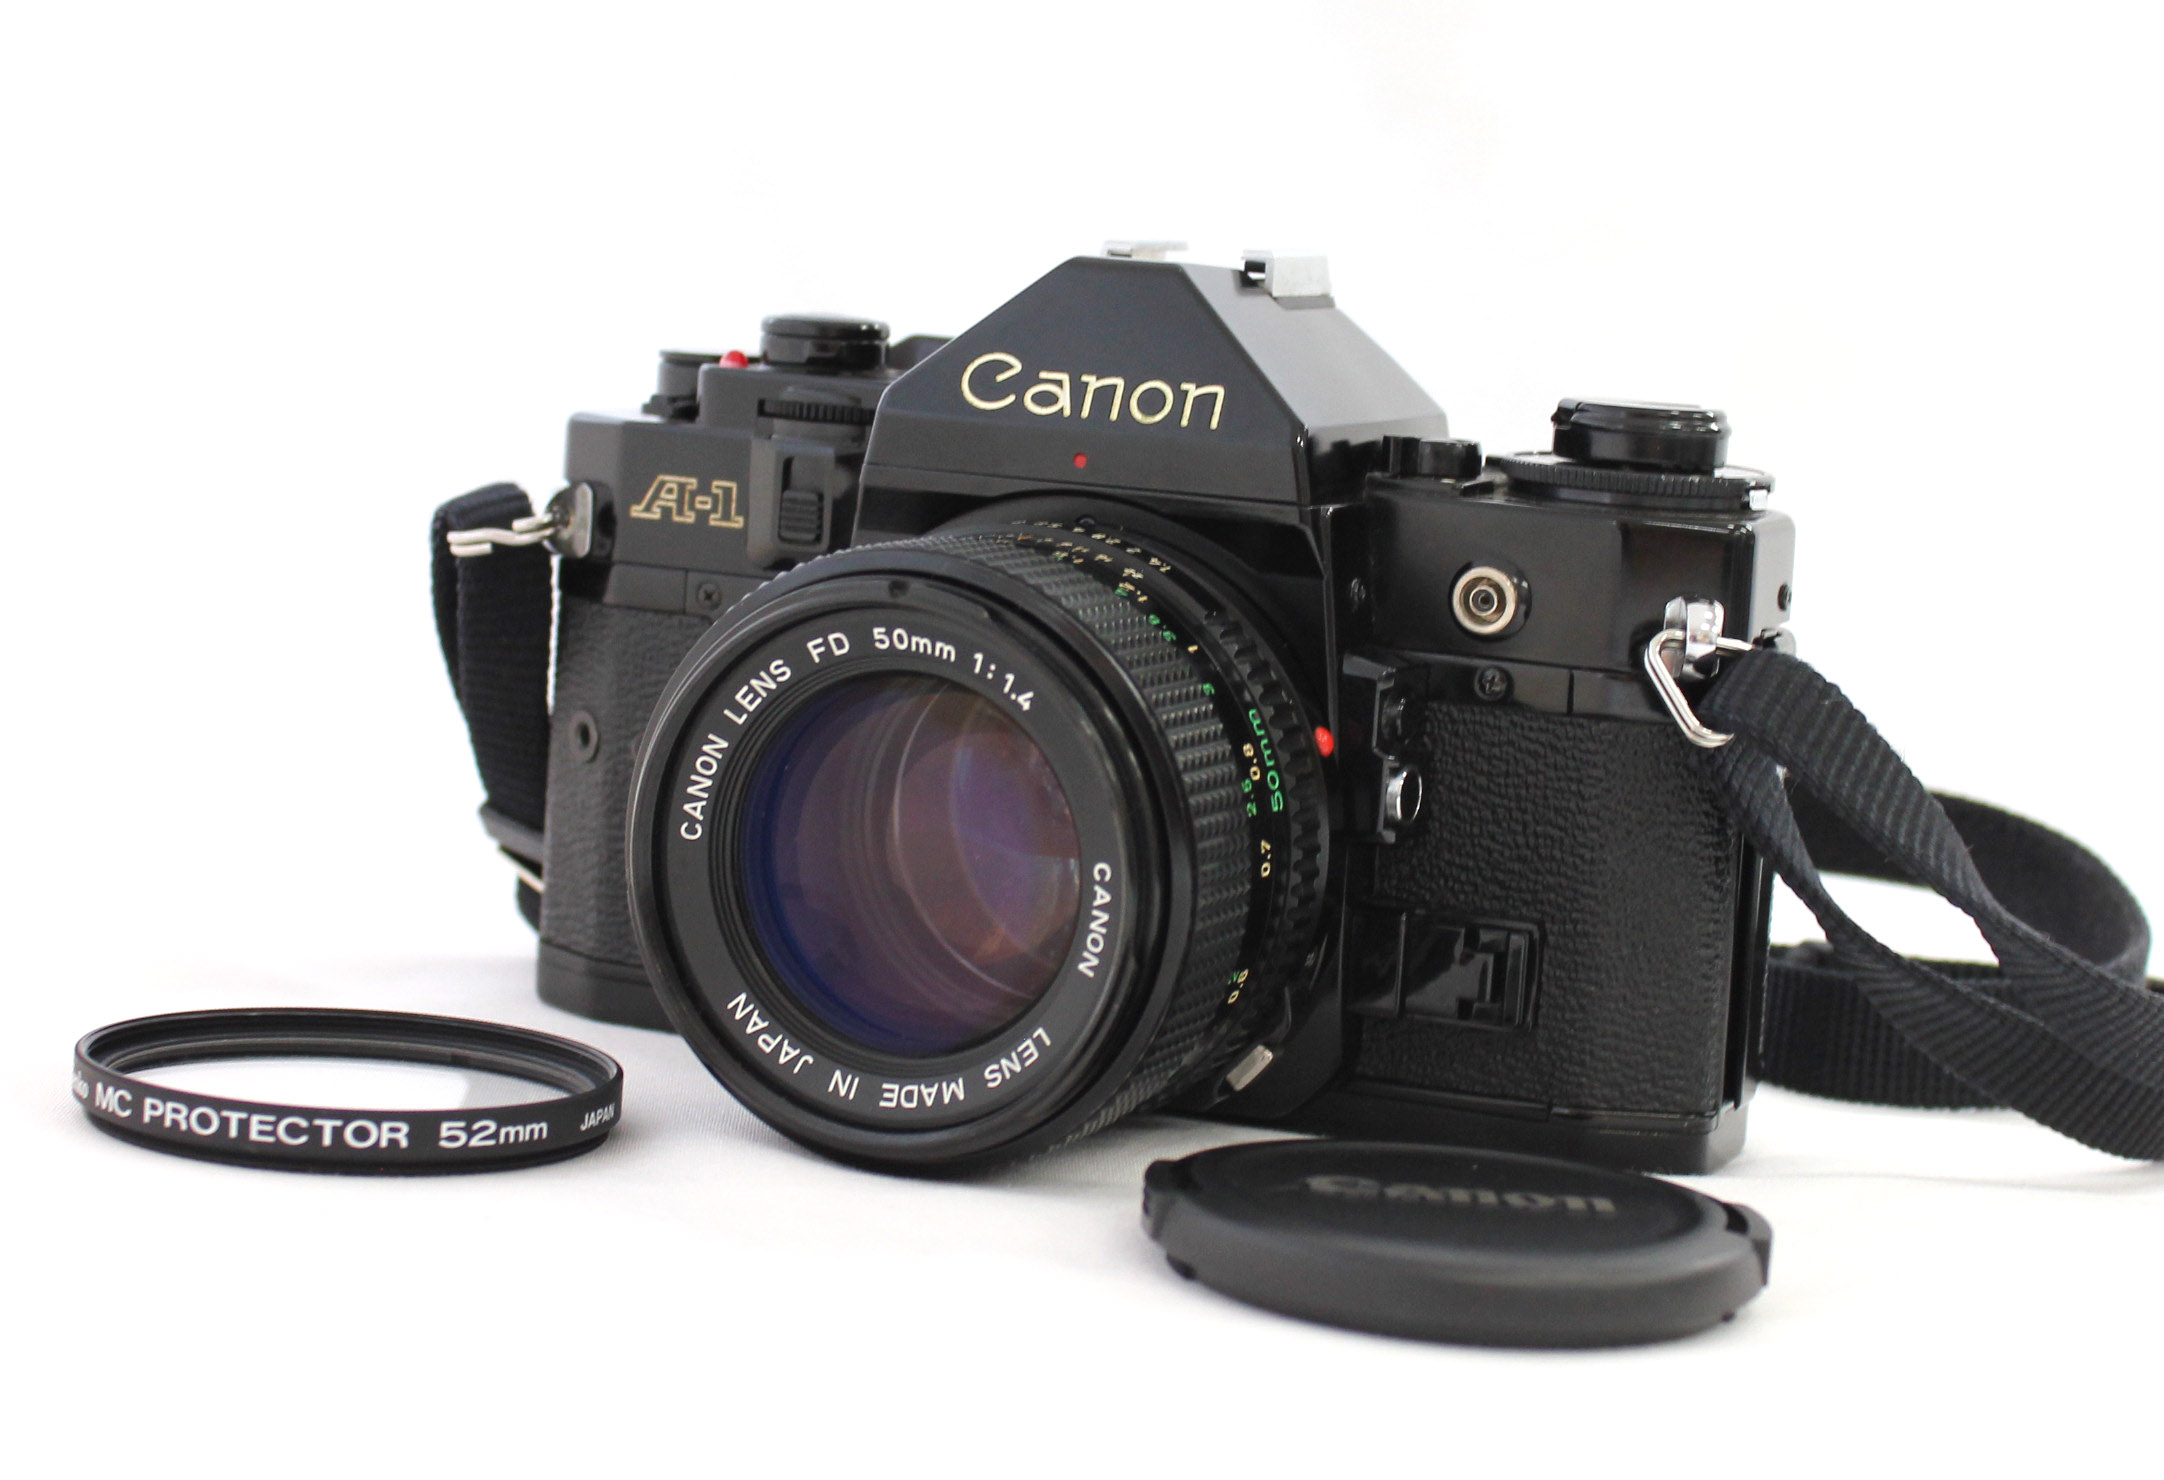 Japan Used Camera Shop | [Excellent+++++] Canon A-1 35mm SLR Film Camera with New FD NFD 50mm F/1.4 Lens from Japan